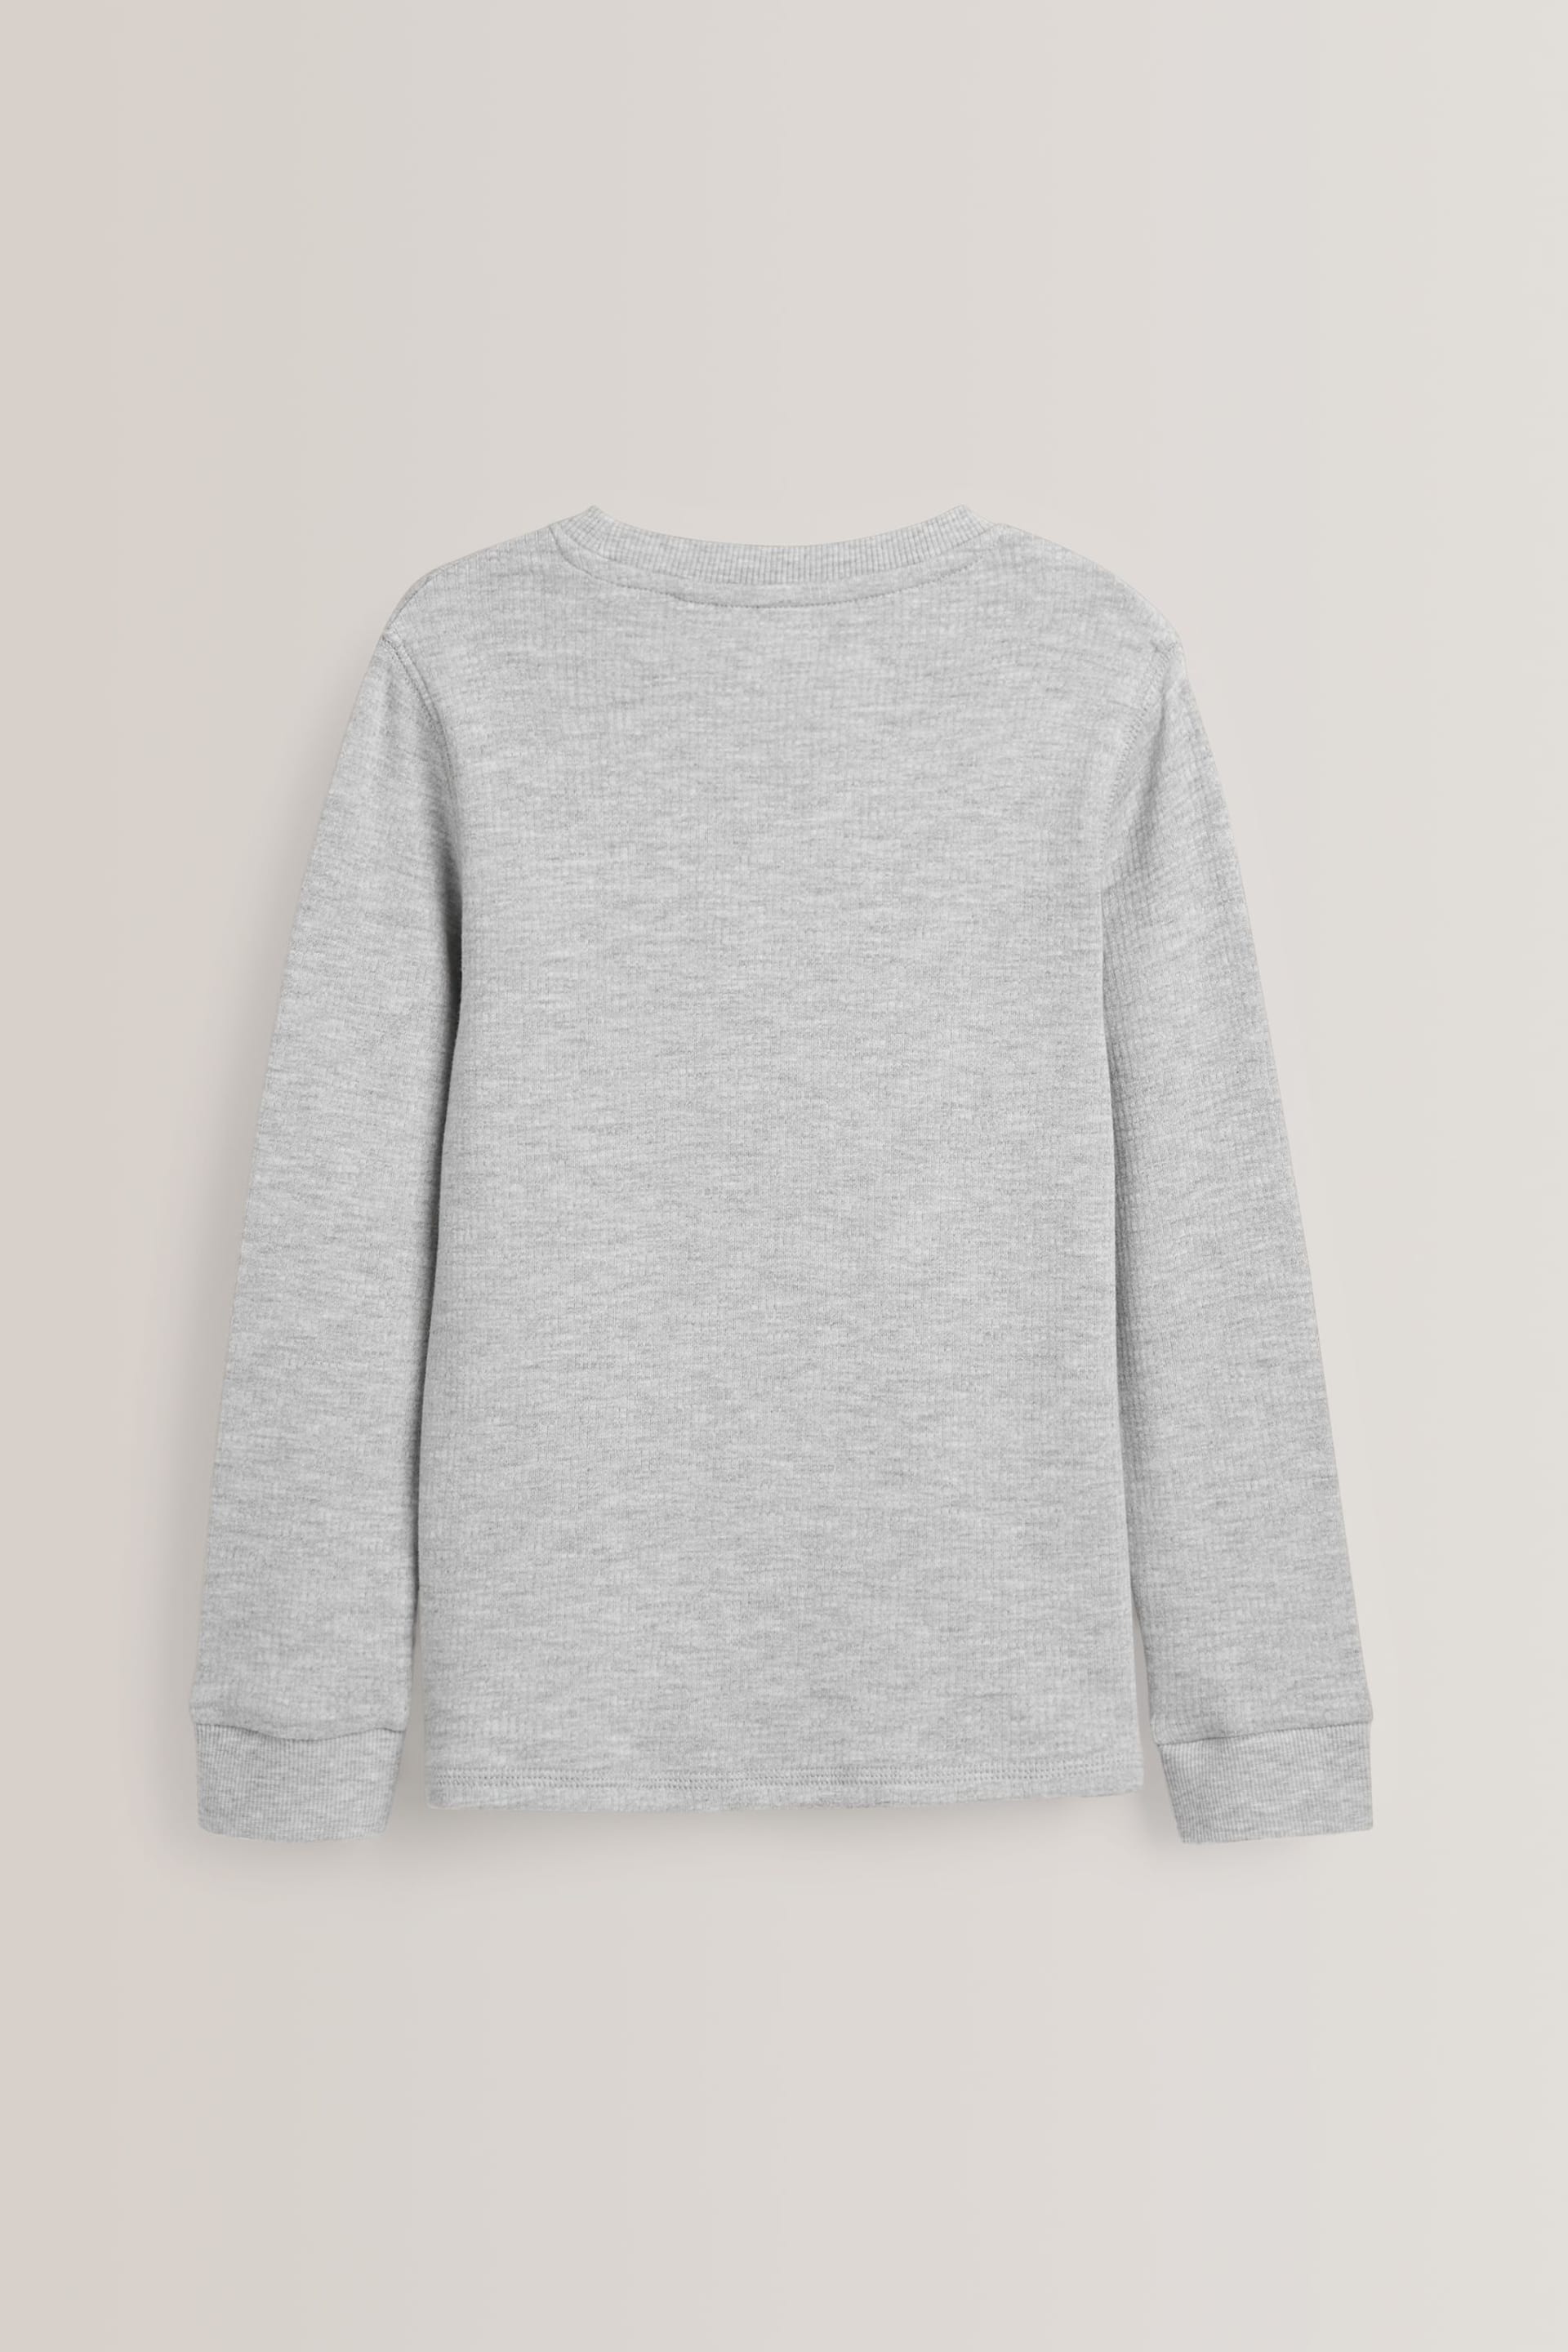 Grey/White Long Sleeve Thermal Tops 2 Pack (2-16yrs) - Image 3 of 5